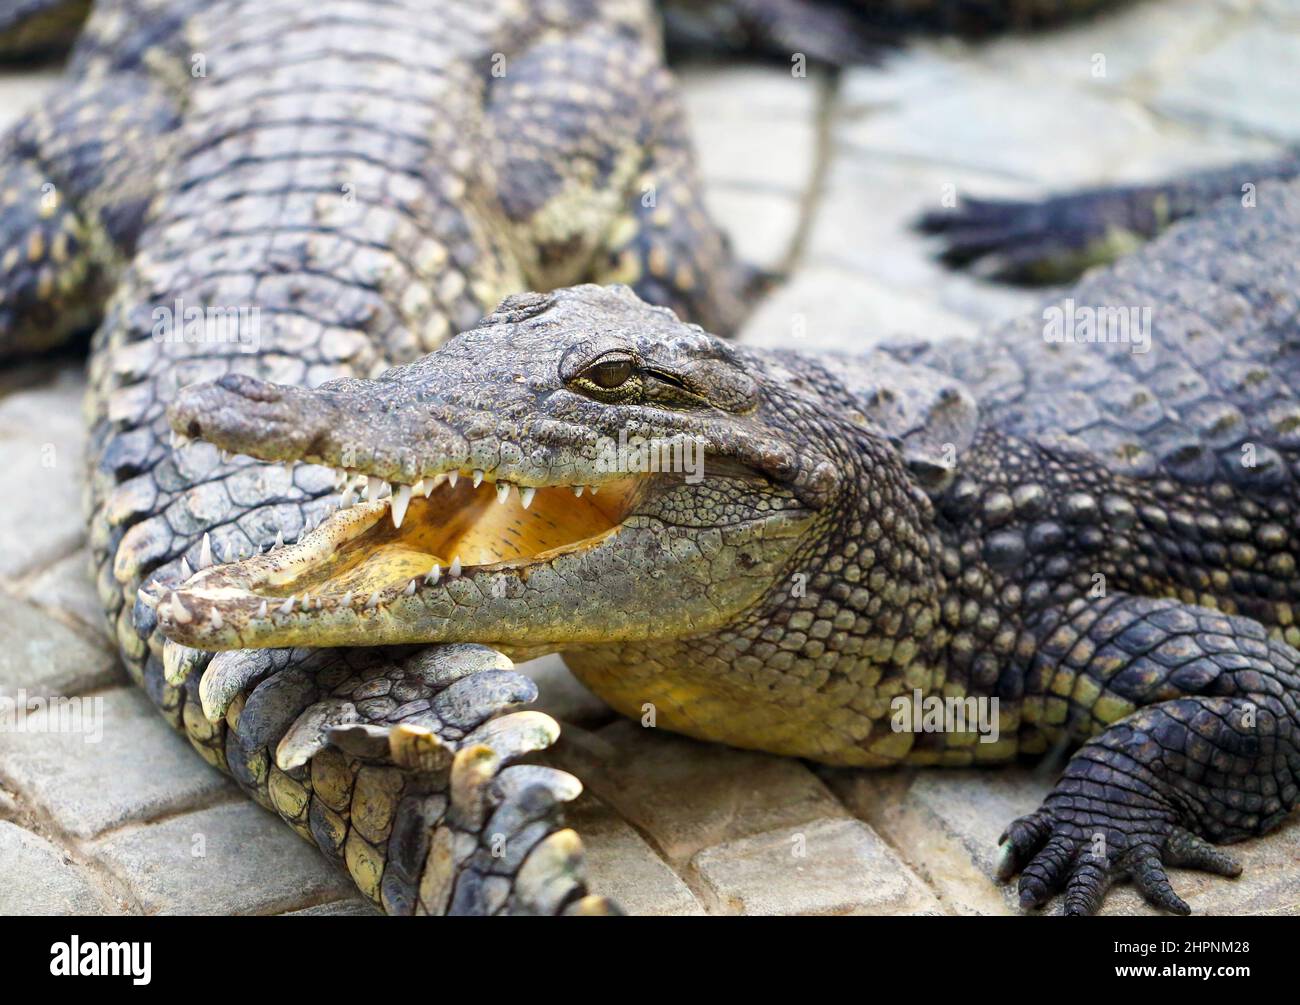 Beautiful toothy reptiles crocodiles are standing on the ground photographed in close-up Stock Photo